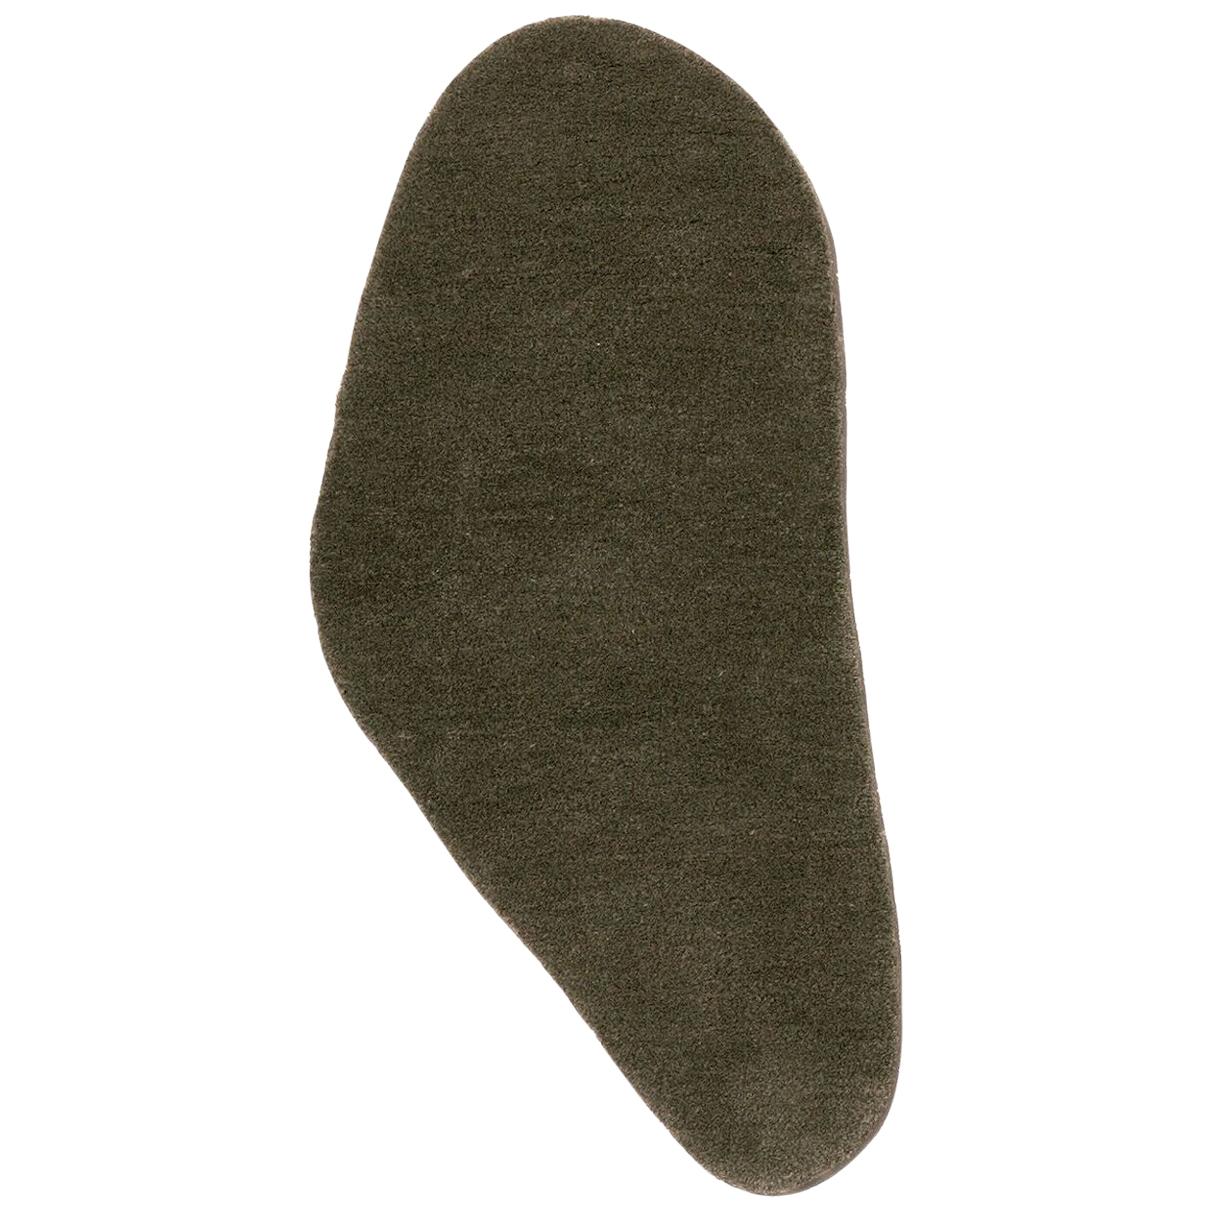 Little Stone 11 Olive Hand-Tufted Wool Rug by Diego Fortunato